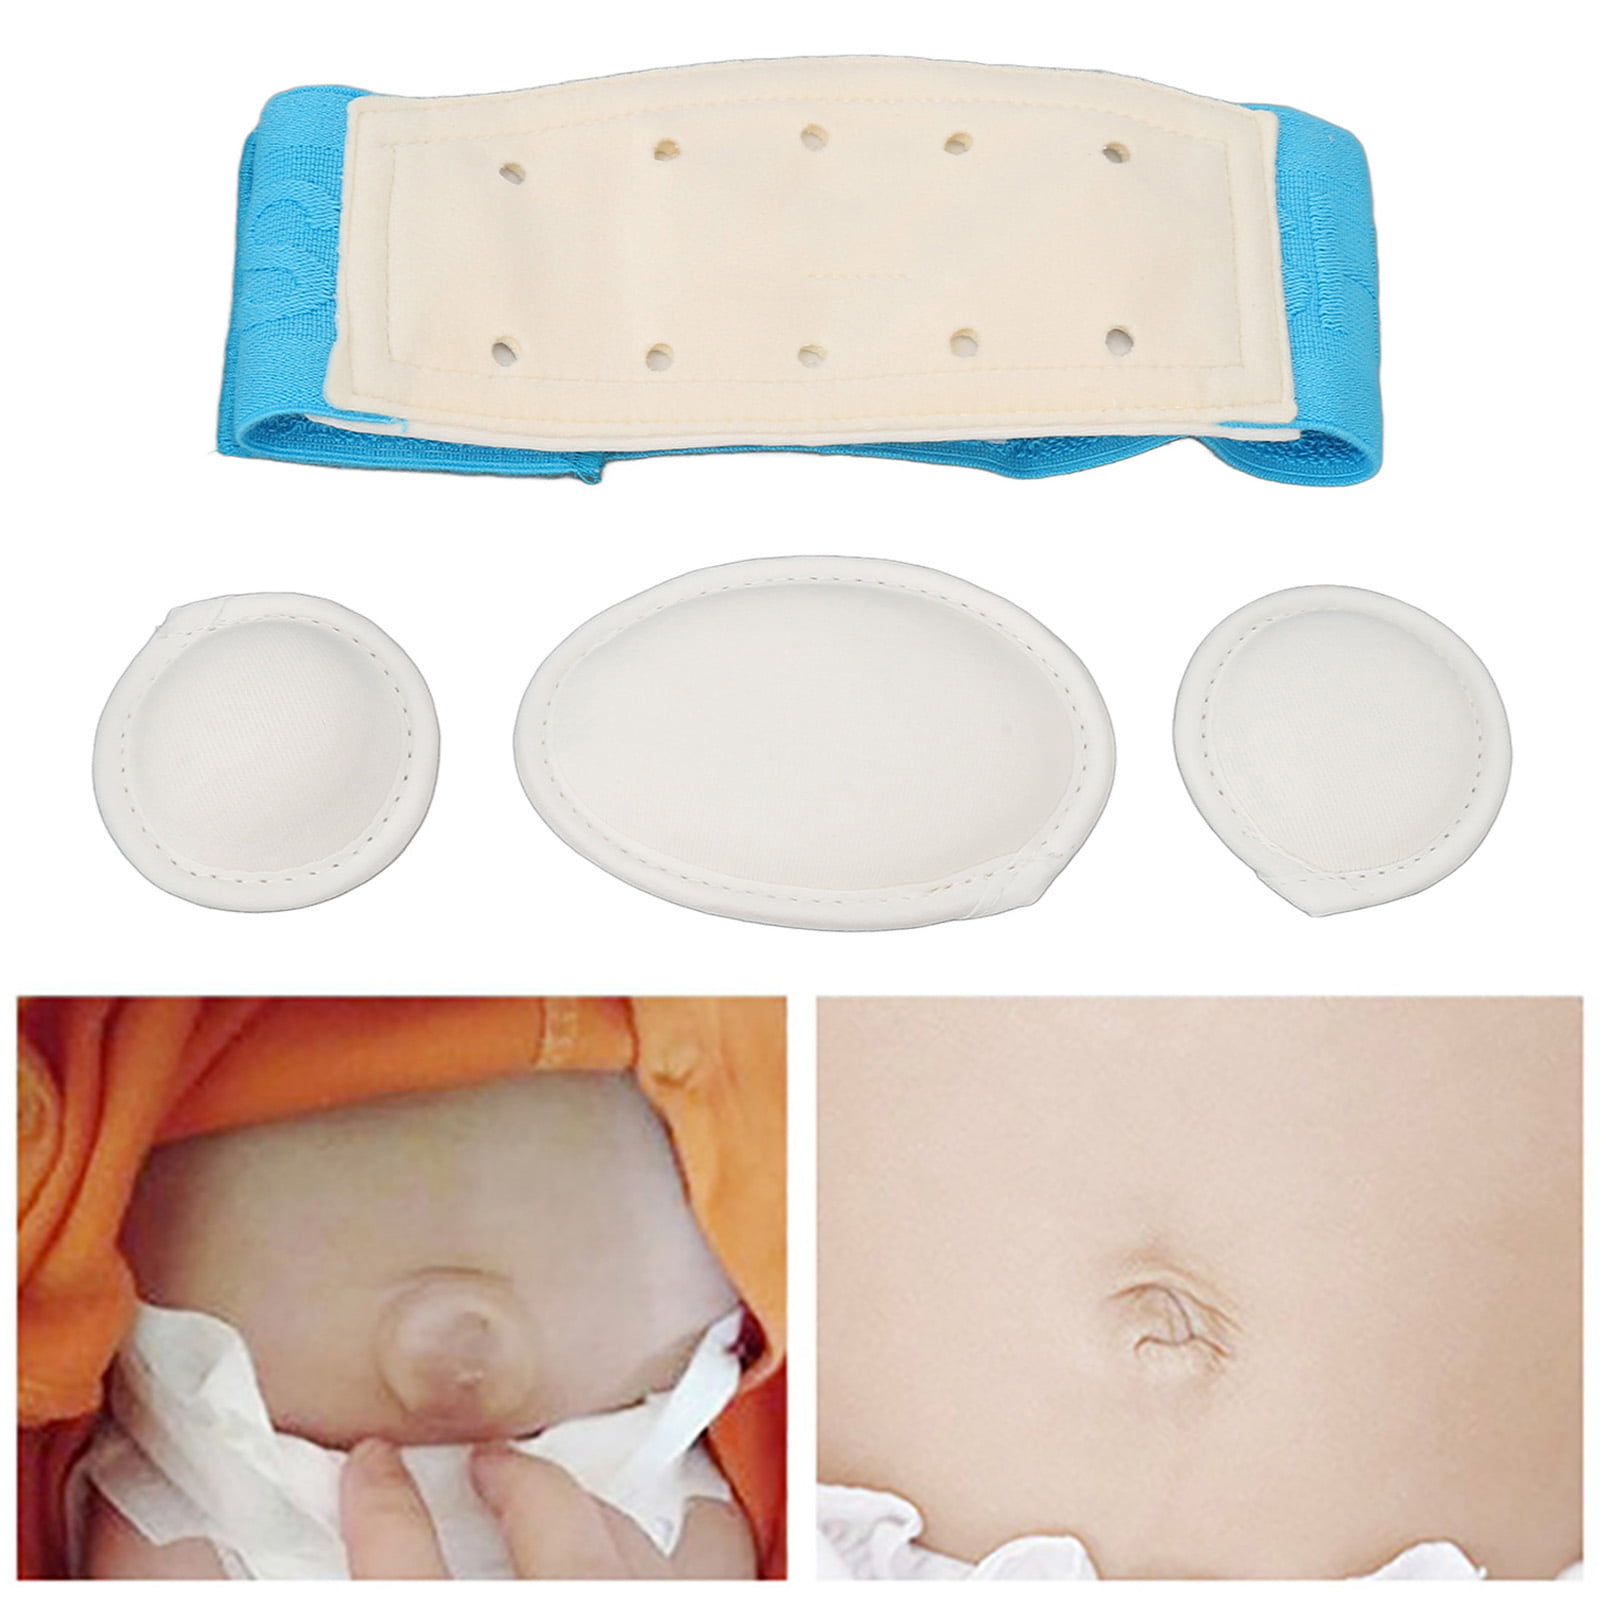 FAGINEY Infant Umbilical Hernia Belly Belt Cotton Fabric Abdominal Wrap Band  For 0 To 12 Months Baby,Infant Hernia Belt,Baby Umbilical Hernia Belt 